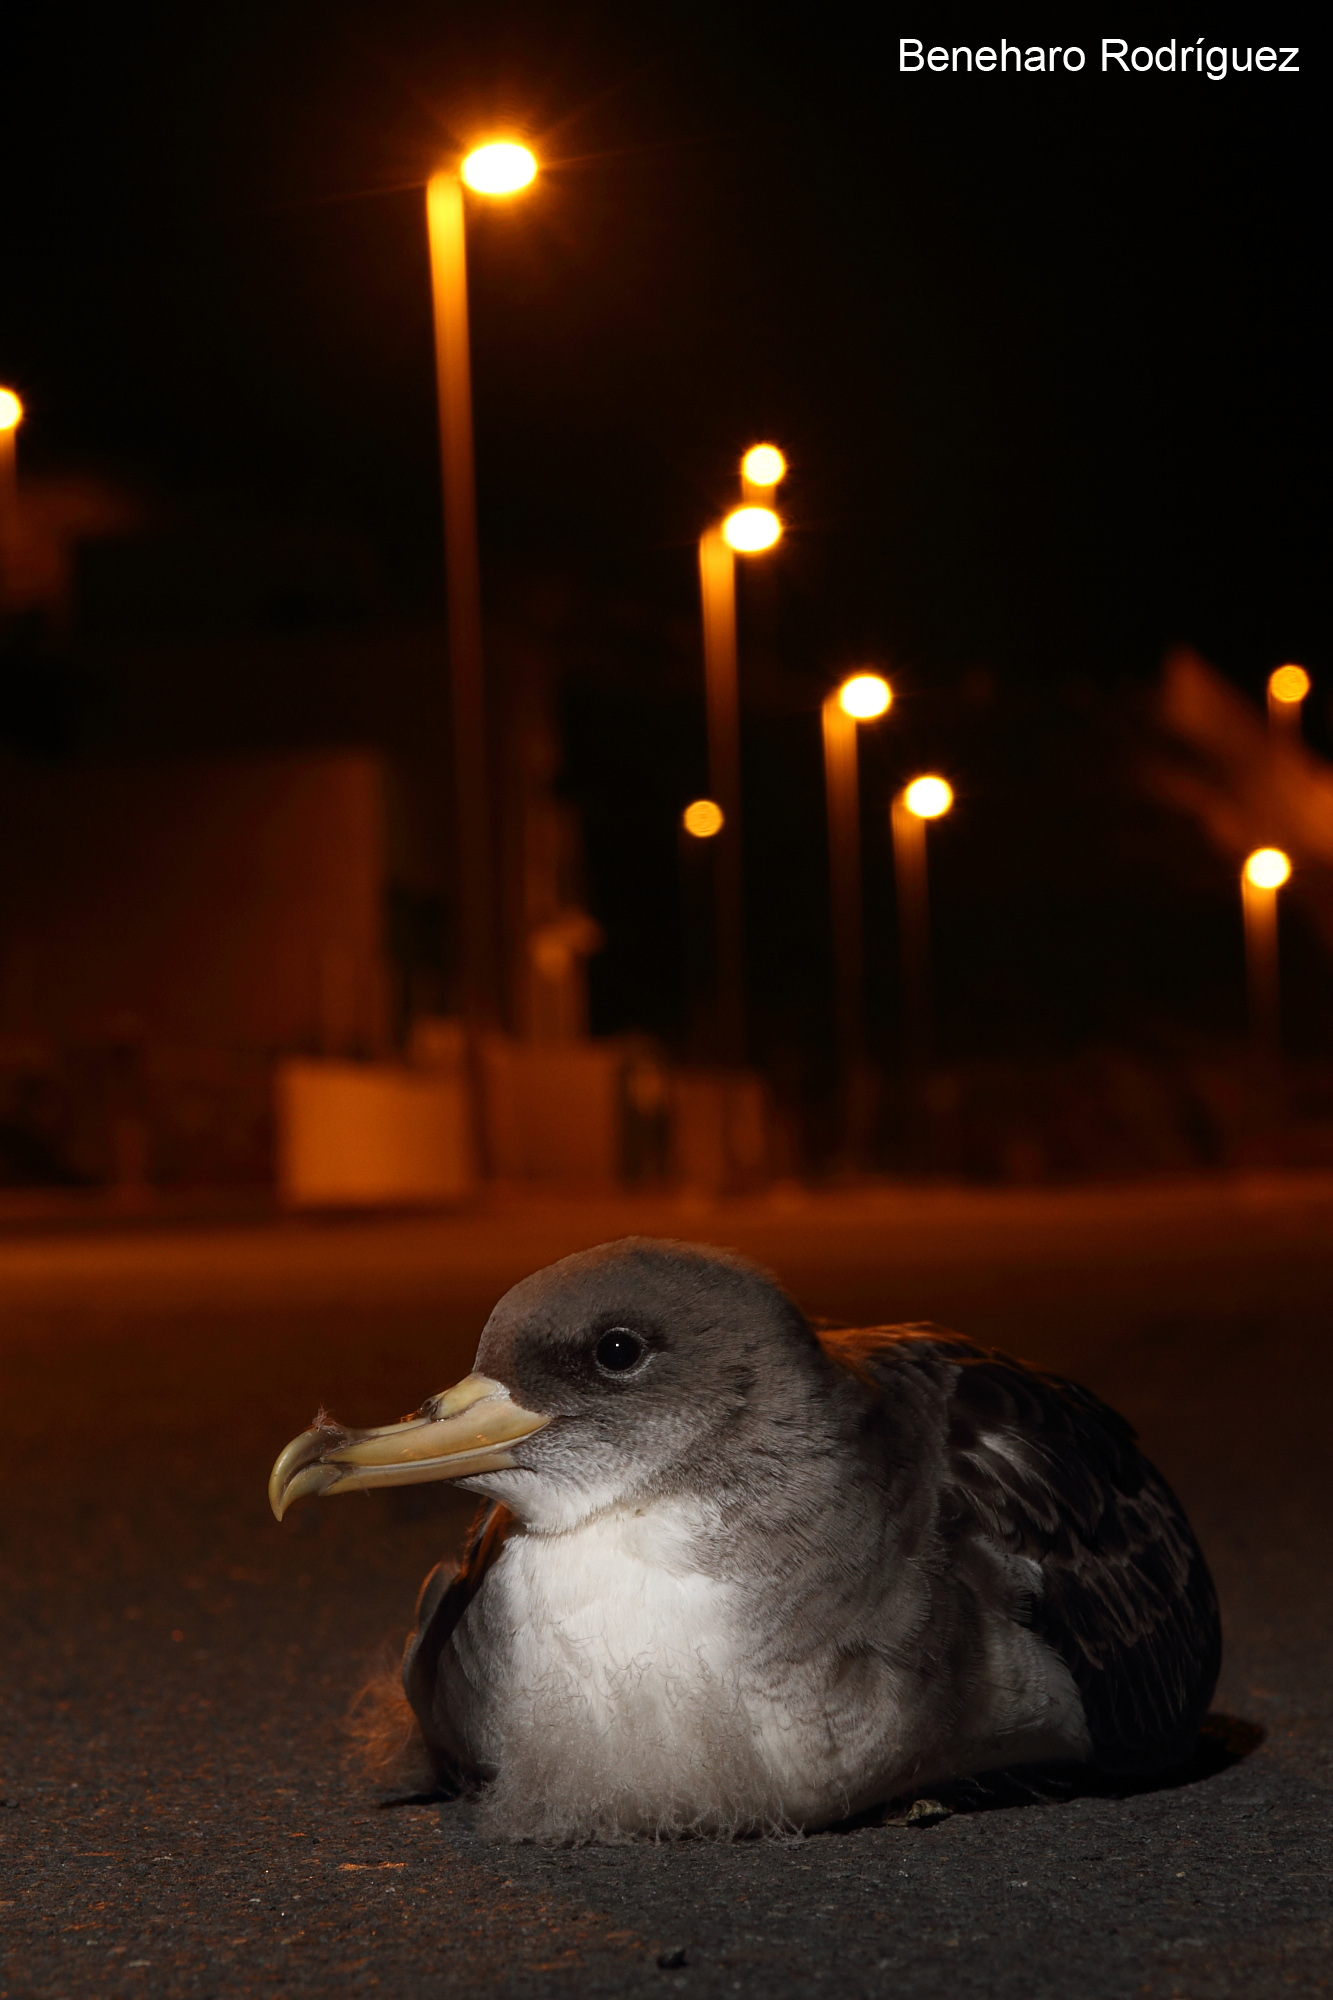 Corys shearwater grounded by lights. Photo Beneharo Rodríguez